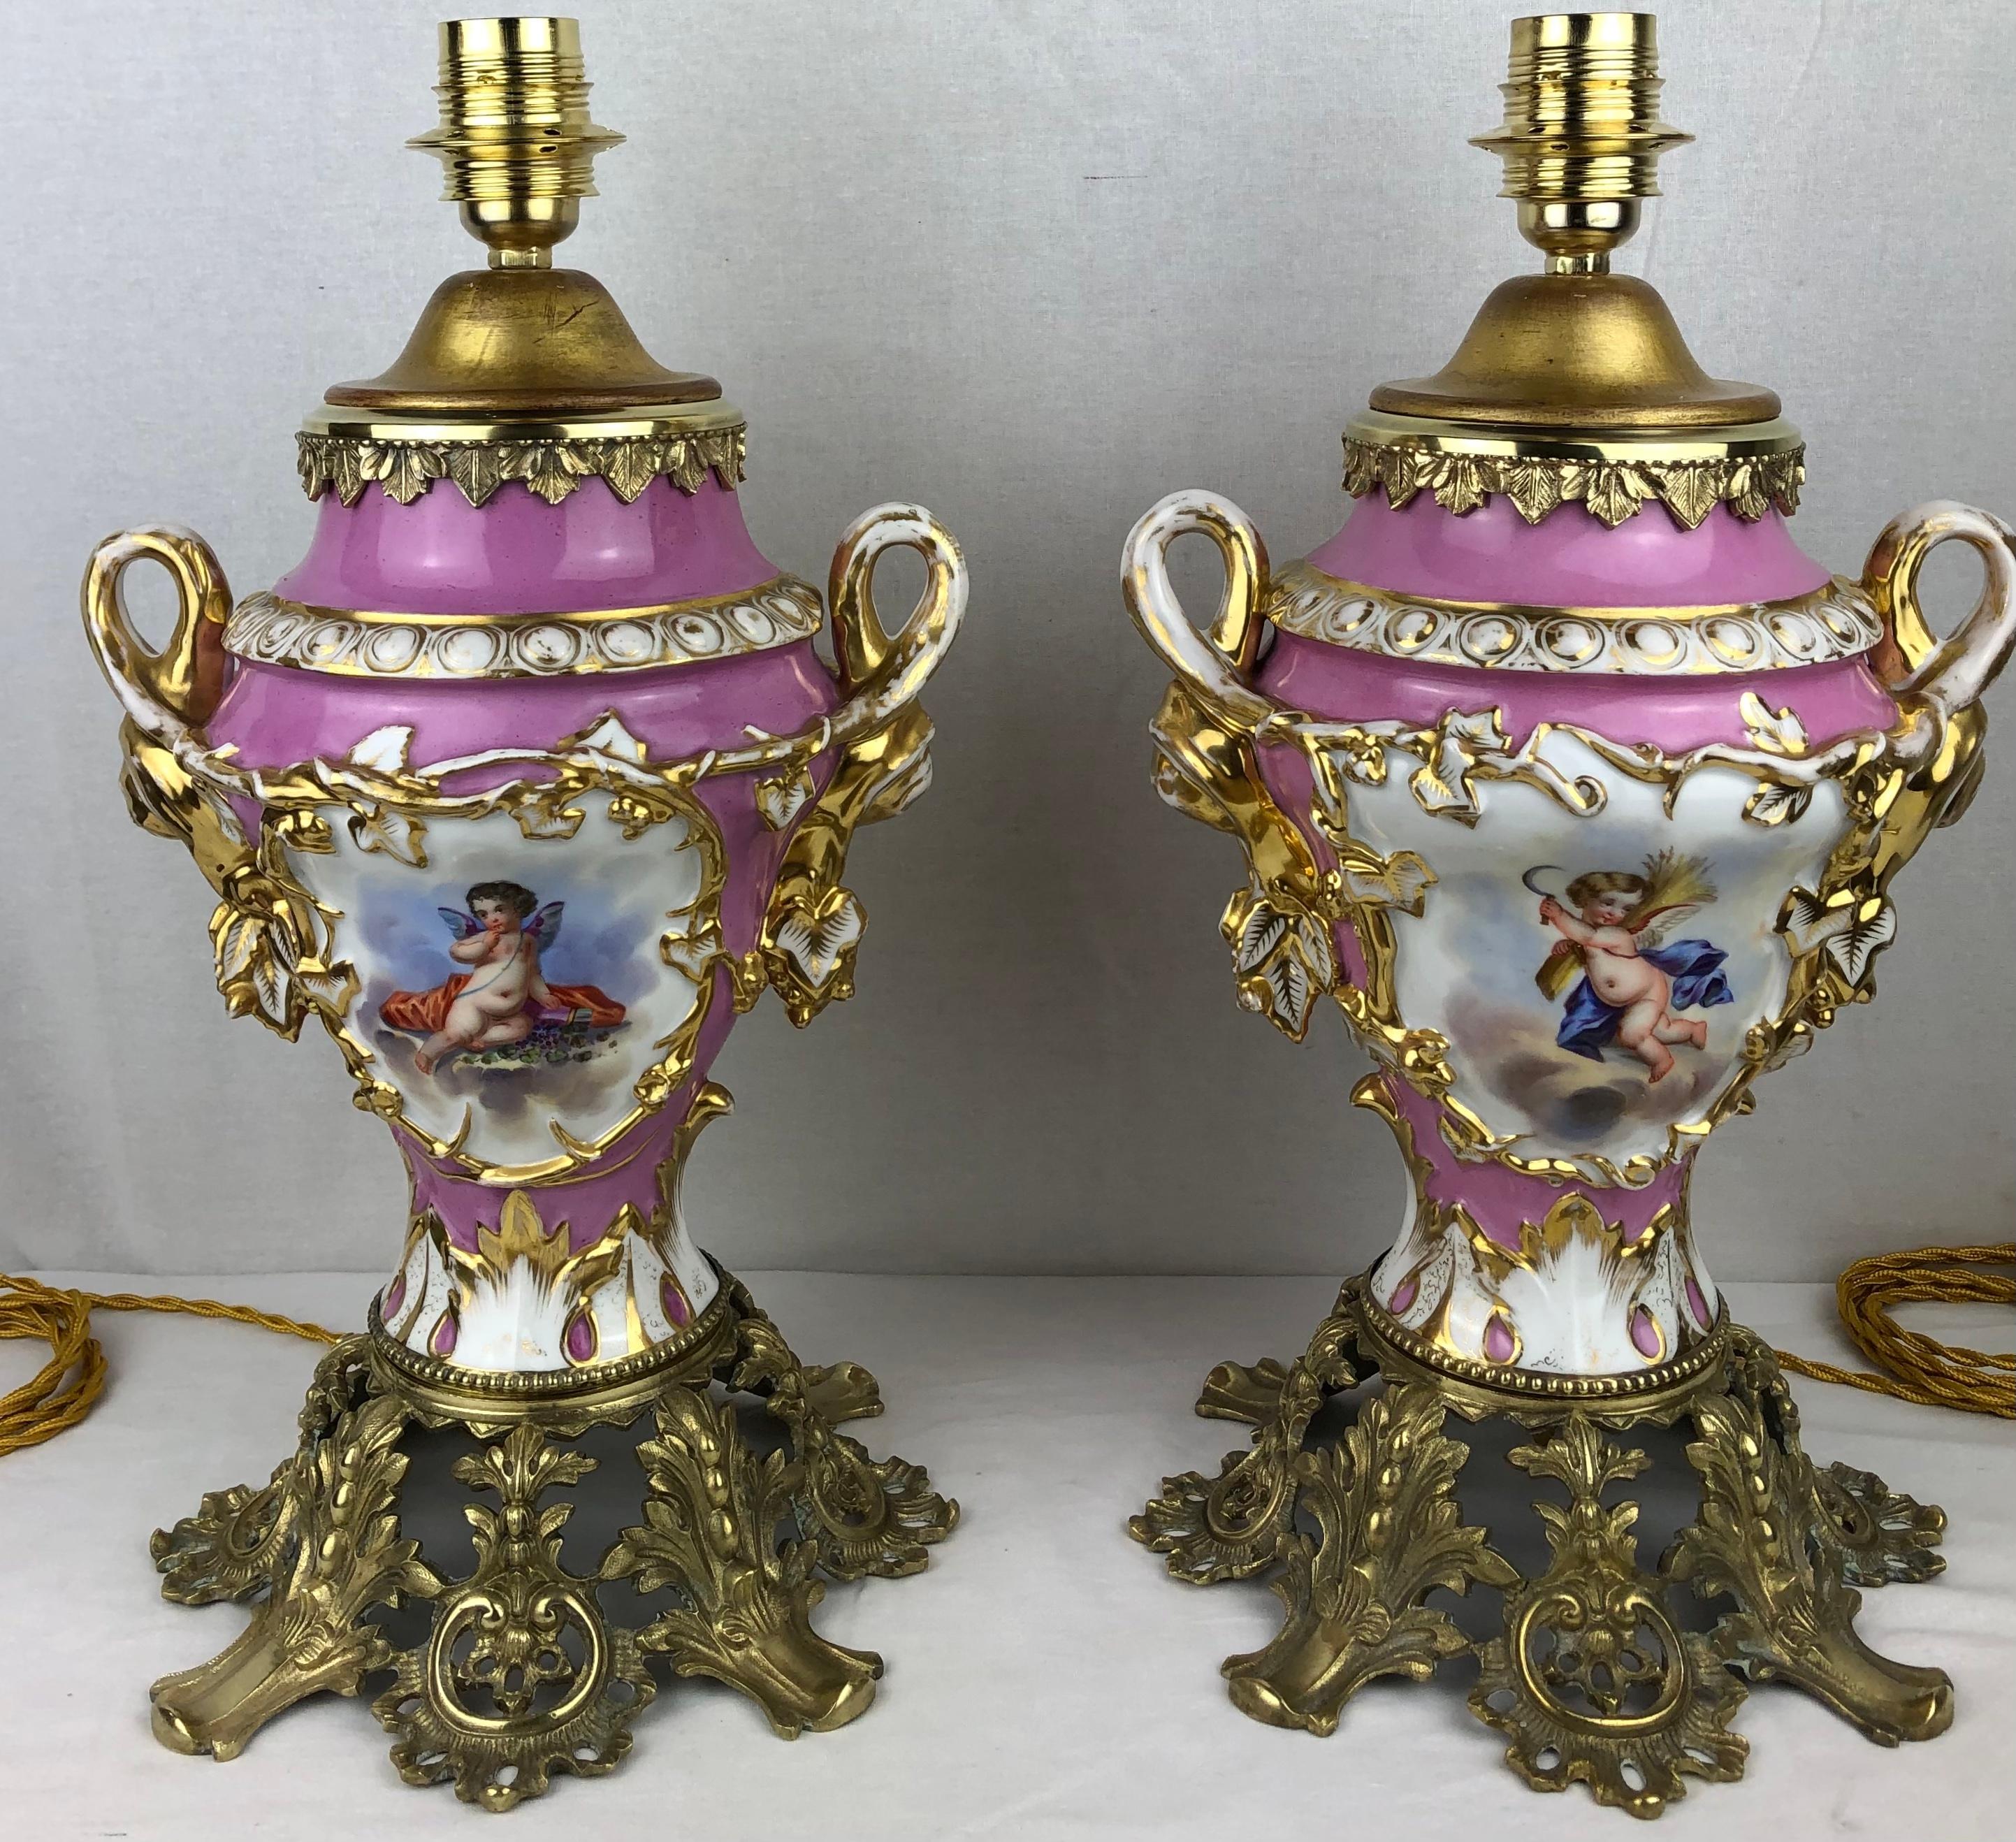 Pair of fine quality 19th Century Louis XVI style Sevres porcelain ormolu mounted table lamps. Traditional French porcelain. 

These beautiful hand-crafted, hand-painted Porcelain de Sevres table lamps are stunning. One side is painted with cherubs